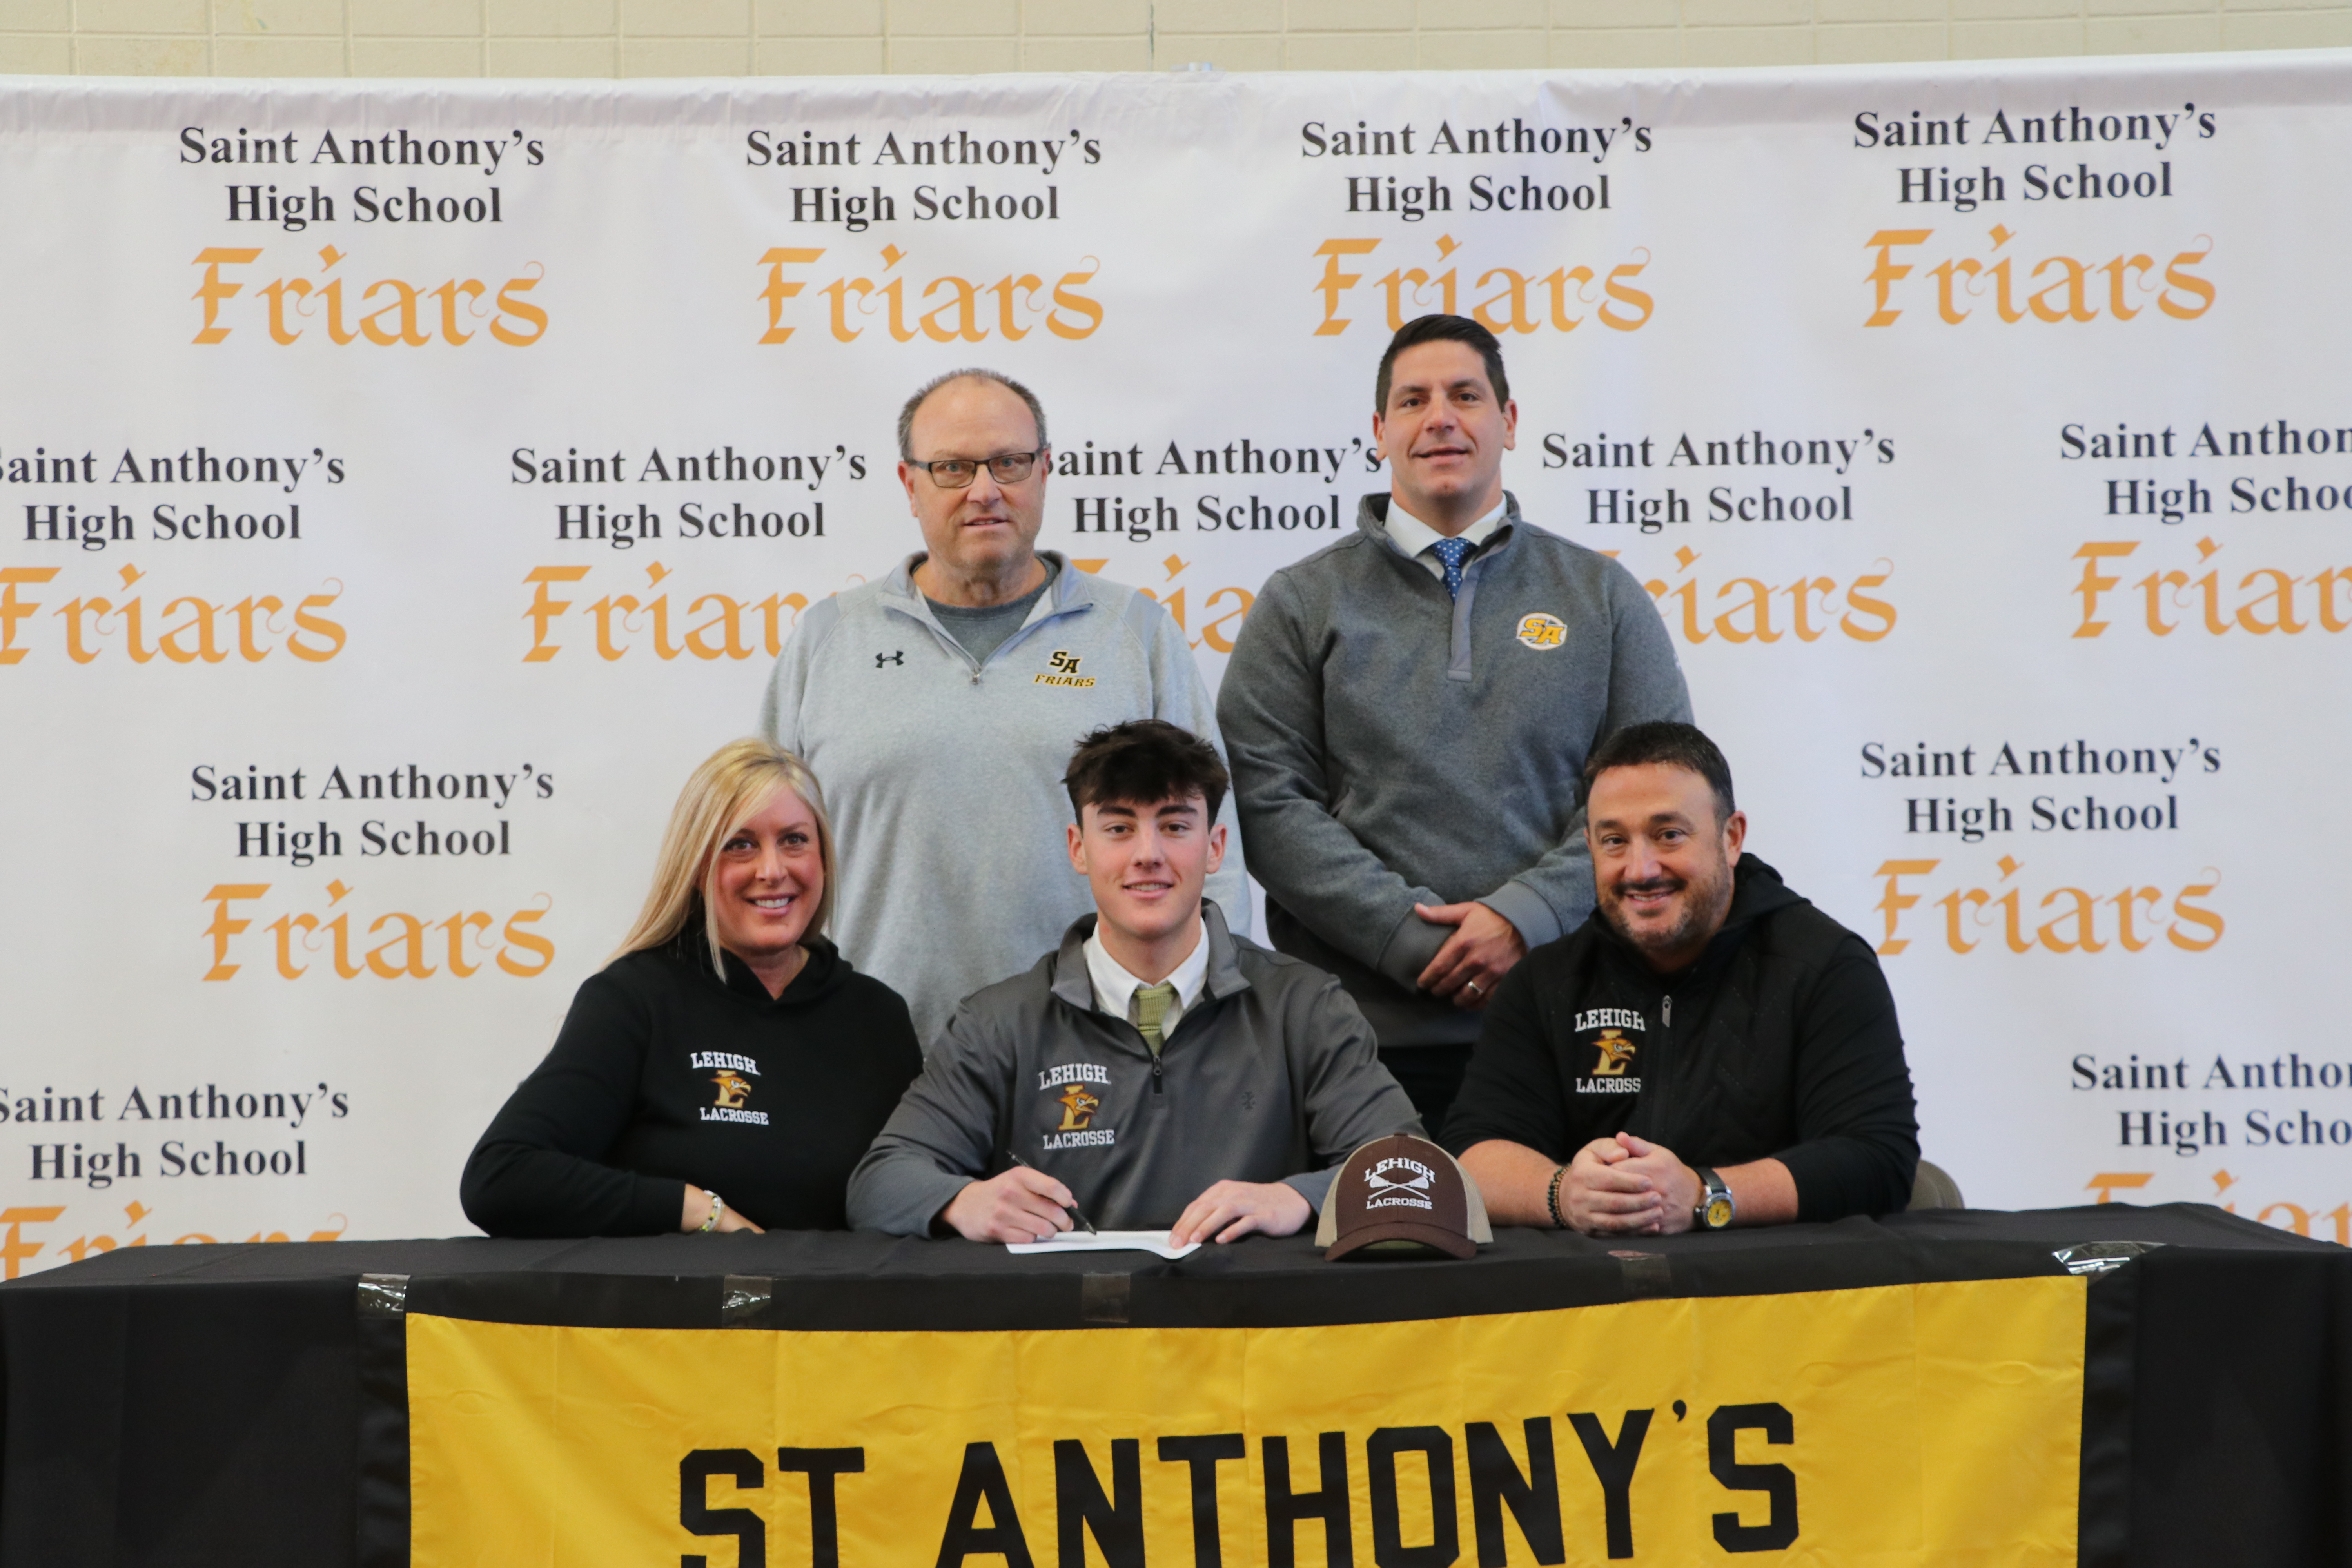 Luke Breslin committed to Lehigh University - CONGRATULATIONS